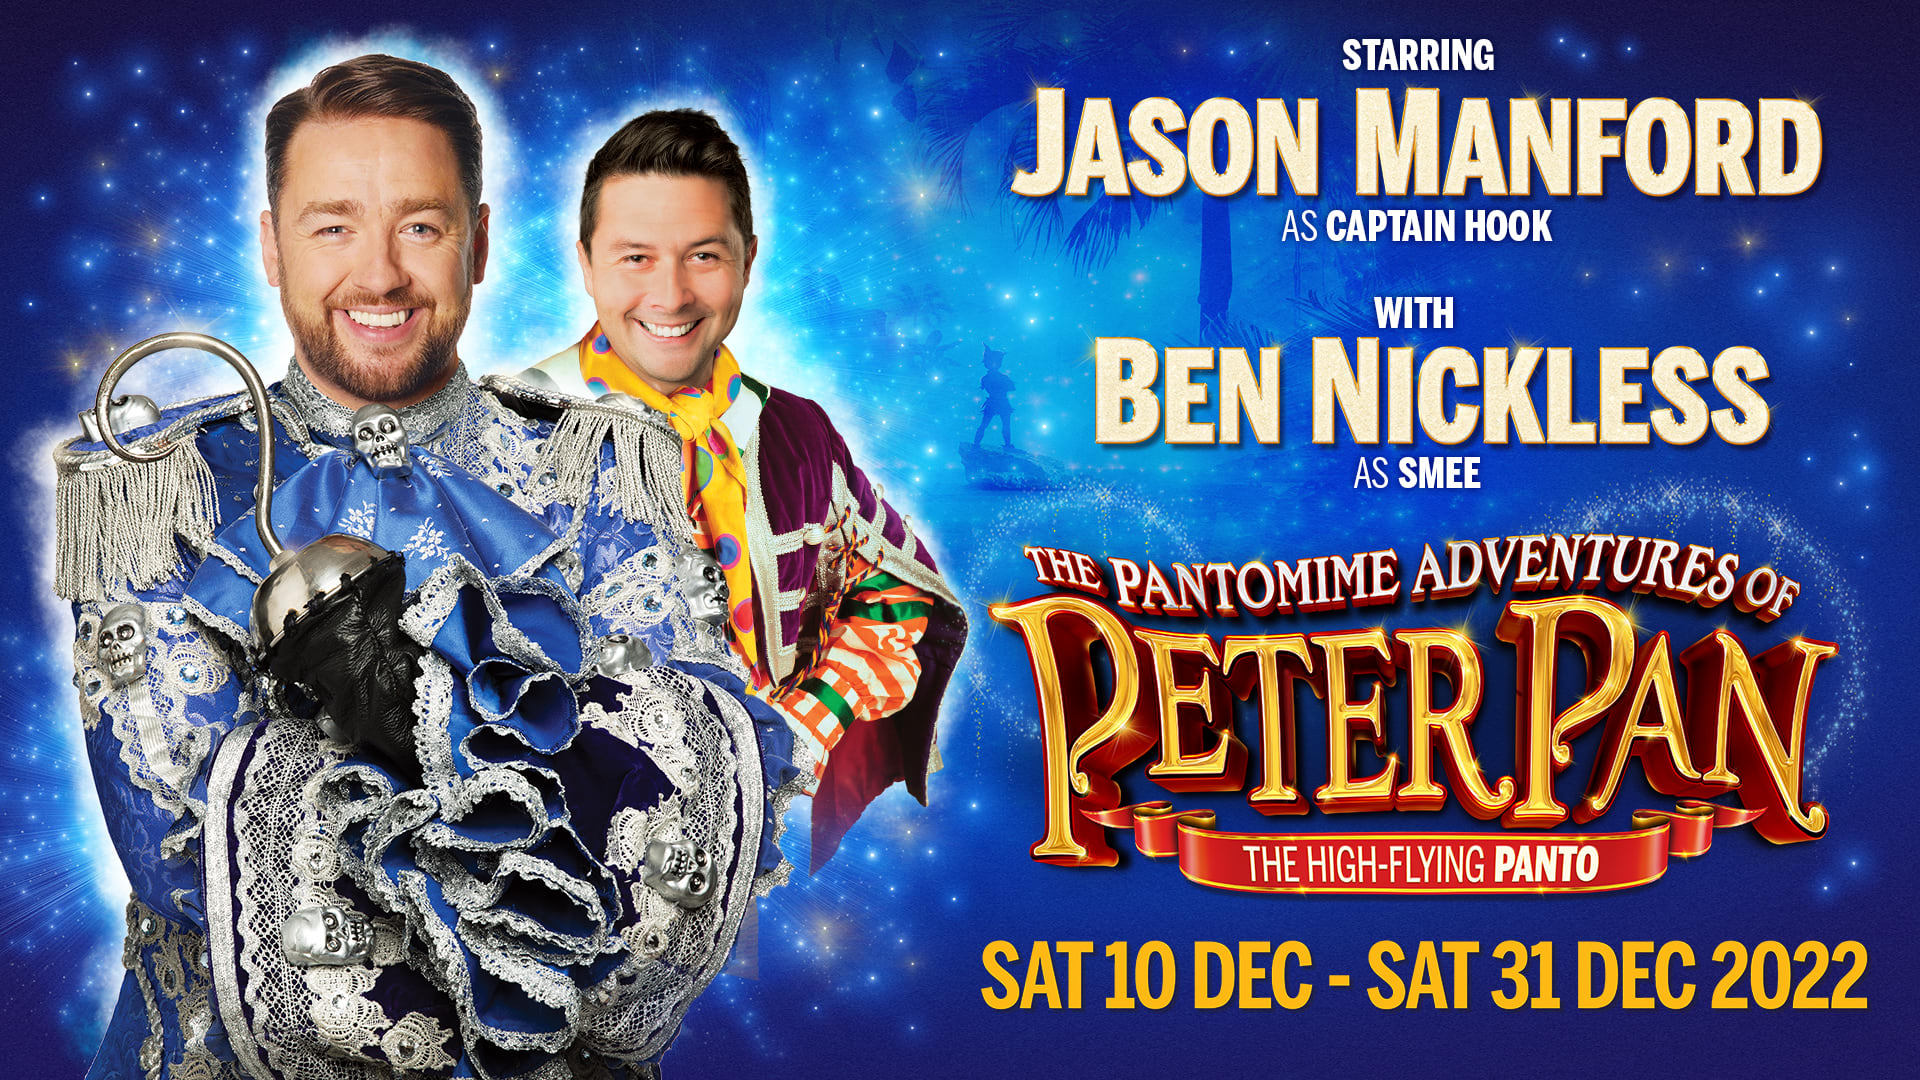 Manchester Opera House Peter Pan 2022 panto tickets and cast with Jason